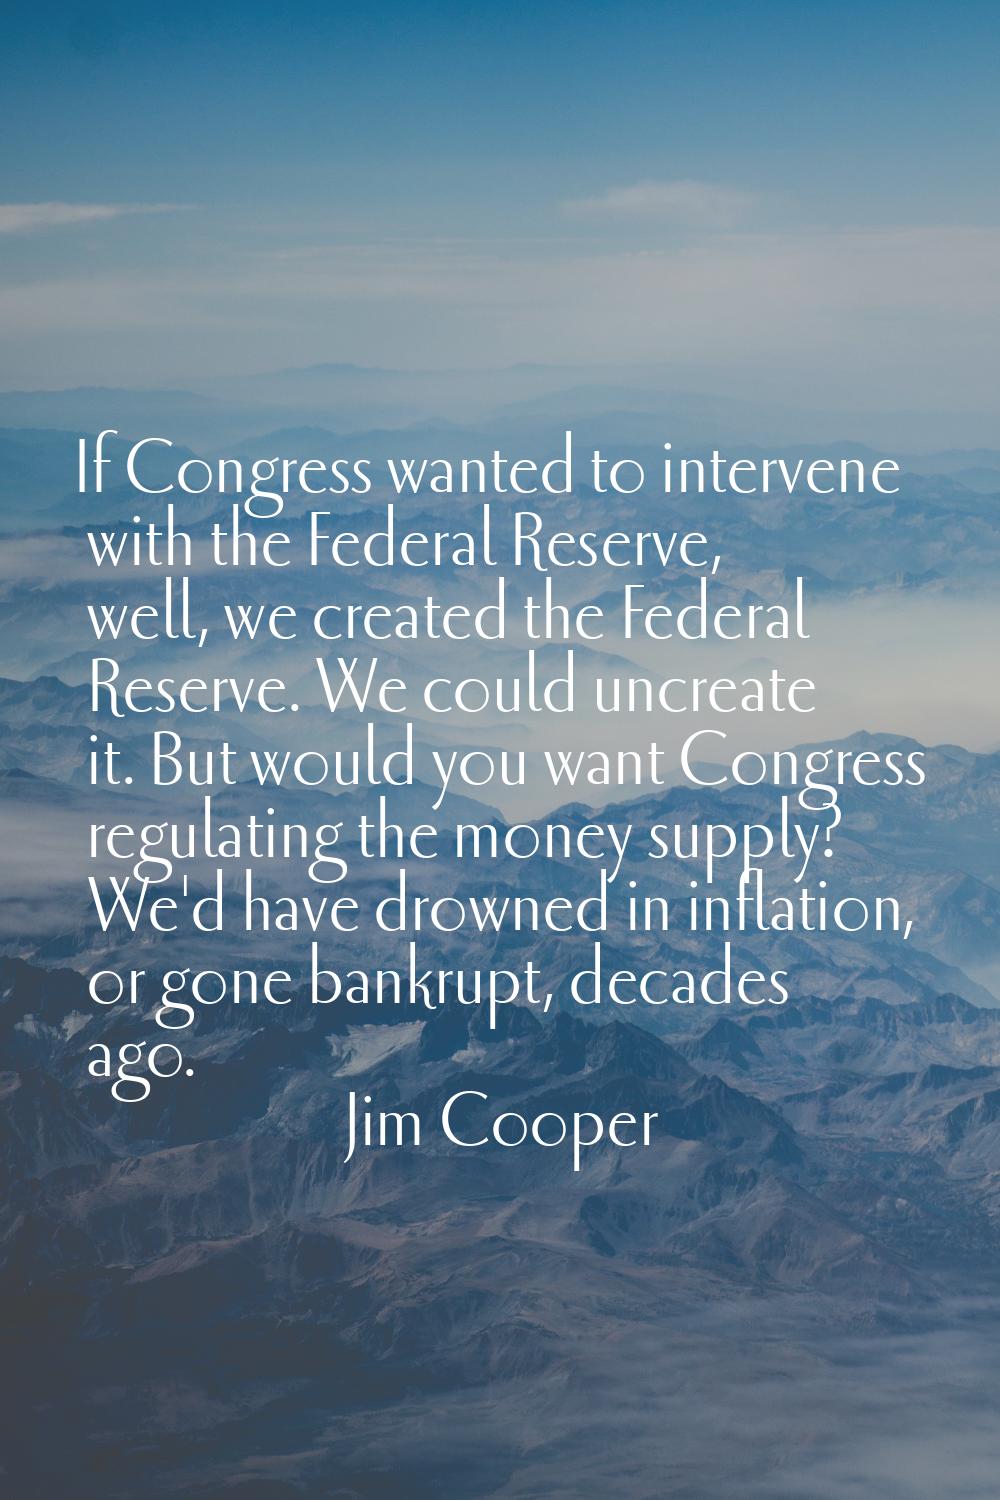 If Congress wanted to intervene with the Federal Reserve, well, we created the Federal Reserve. We 